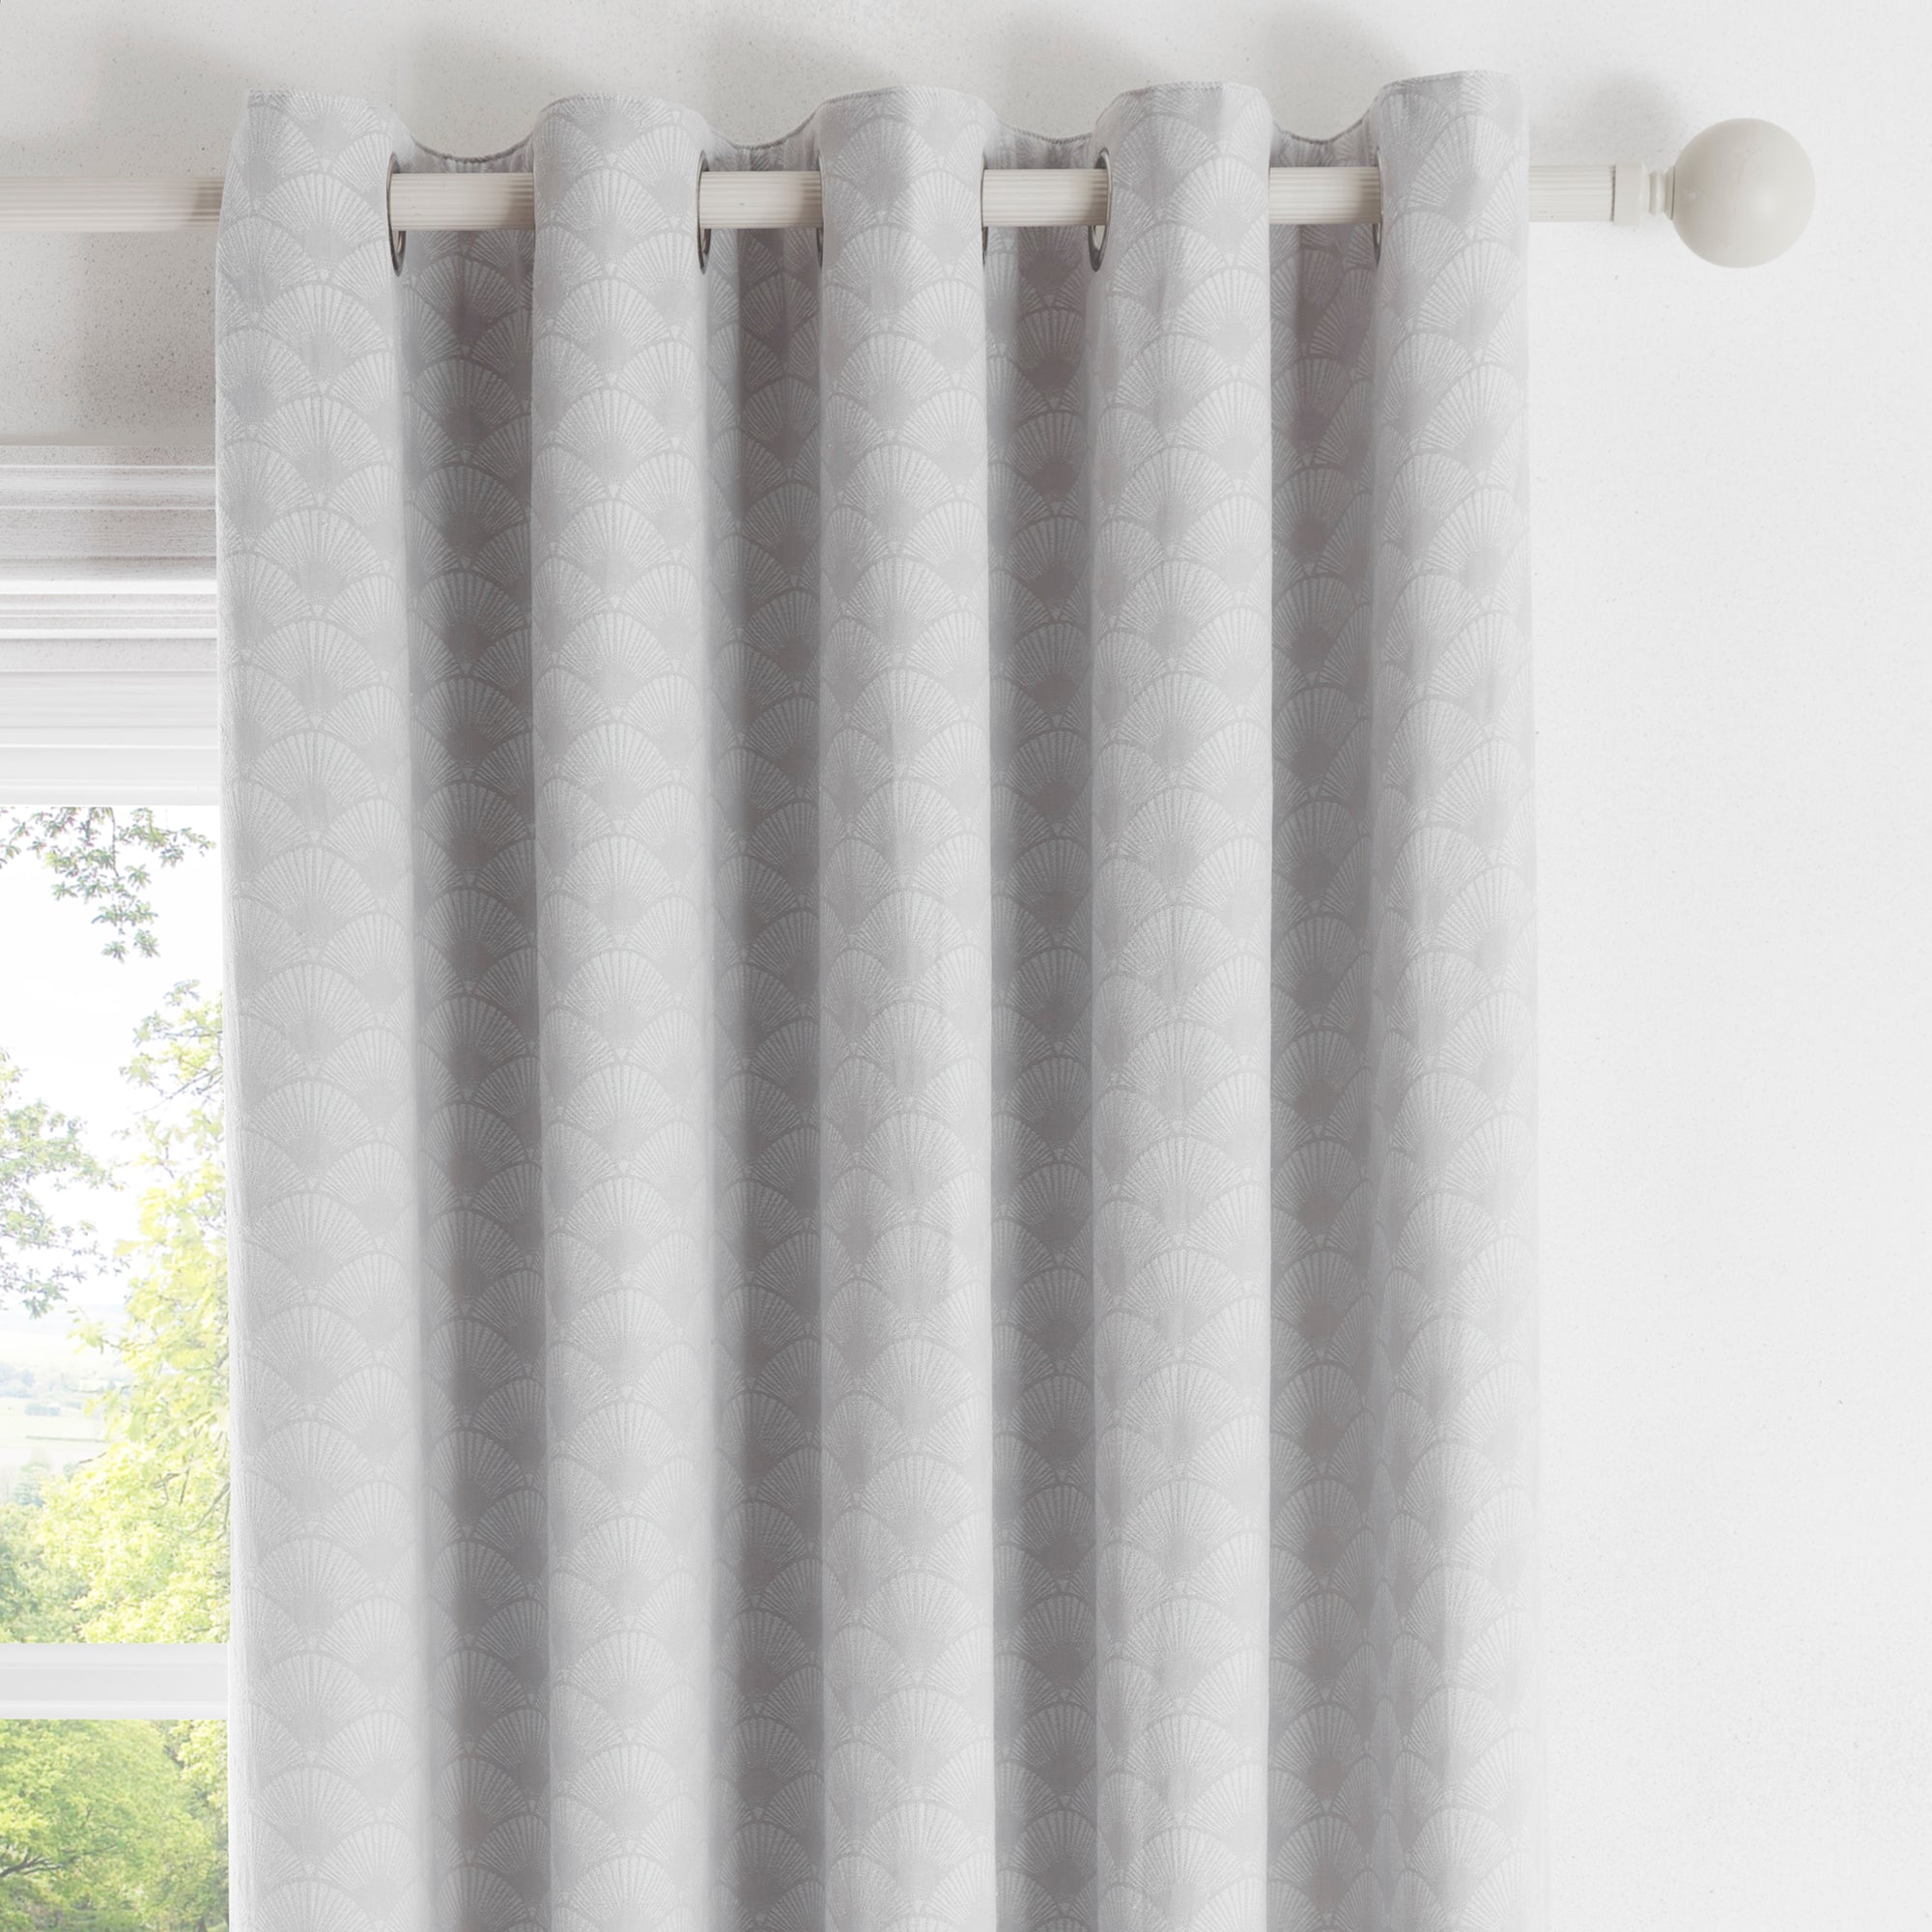 Tiffany - Jacquard Pair of Eyelet Curtains in Silver - by D&D Design